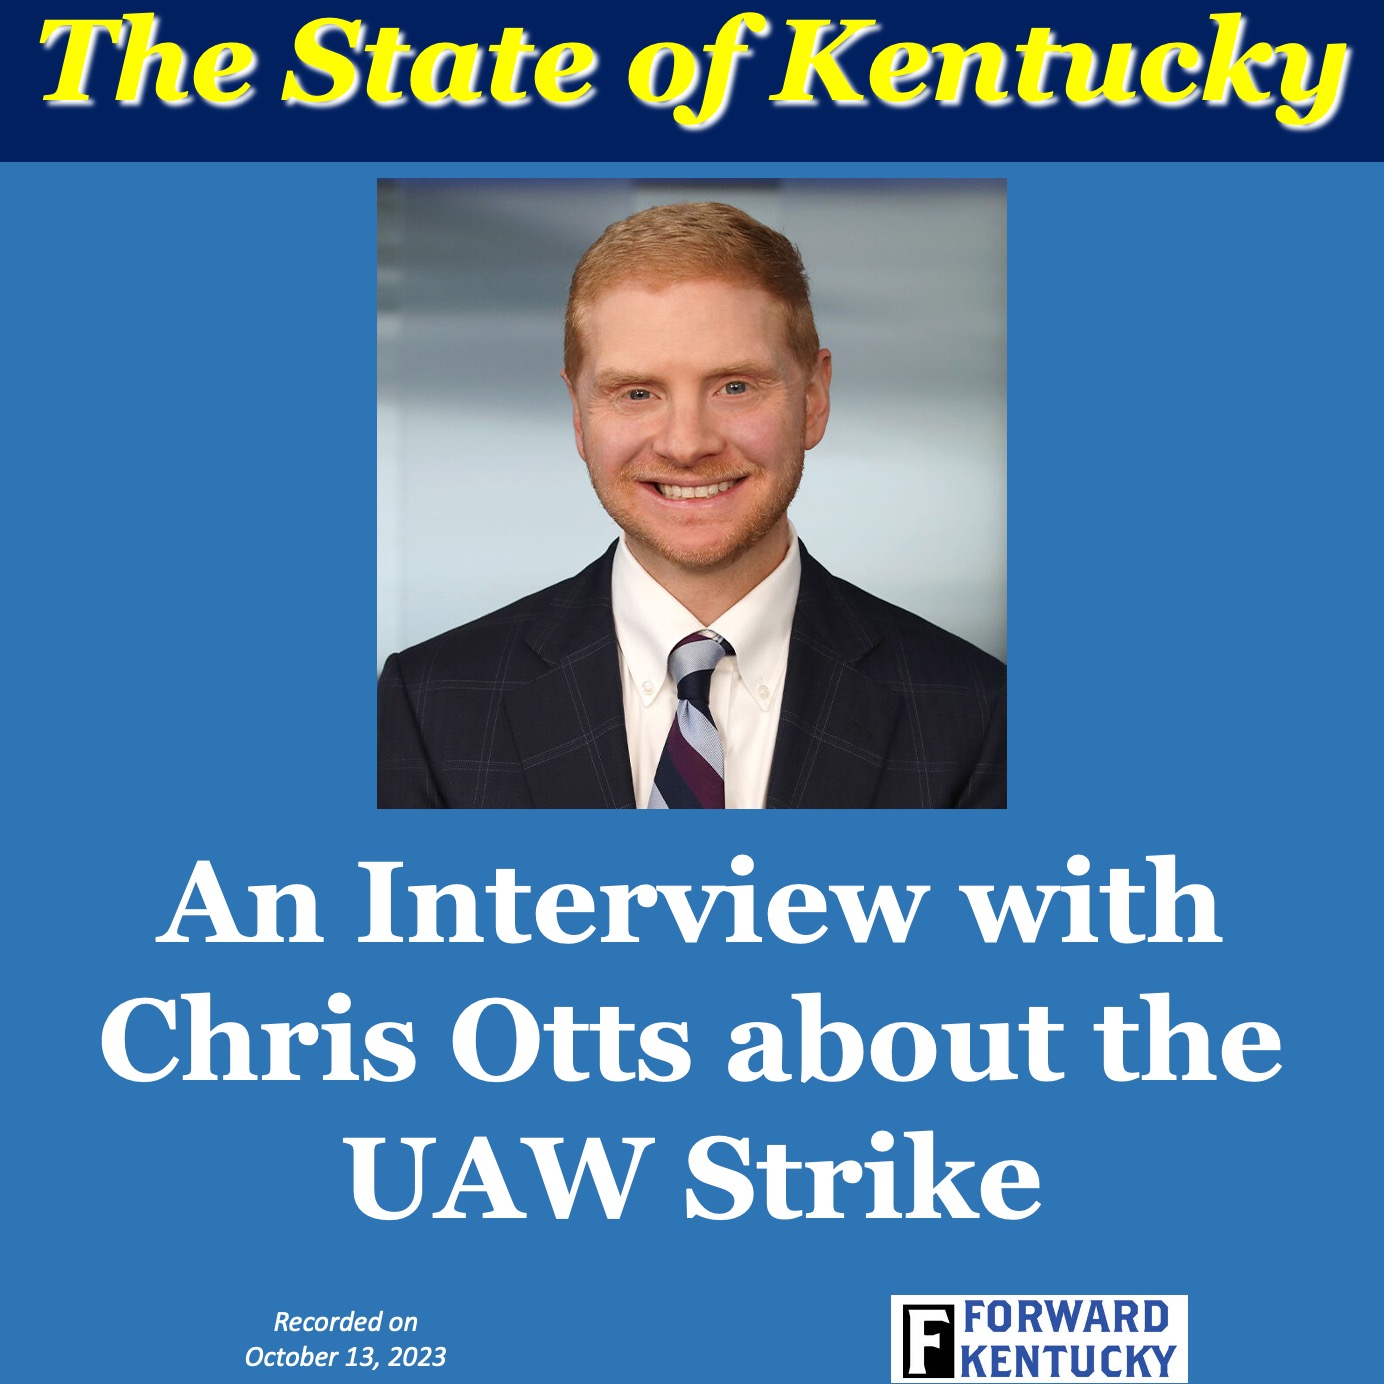 An interview w/ reporter Chris Otts about the UAW strike at the Ford plant